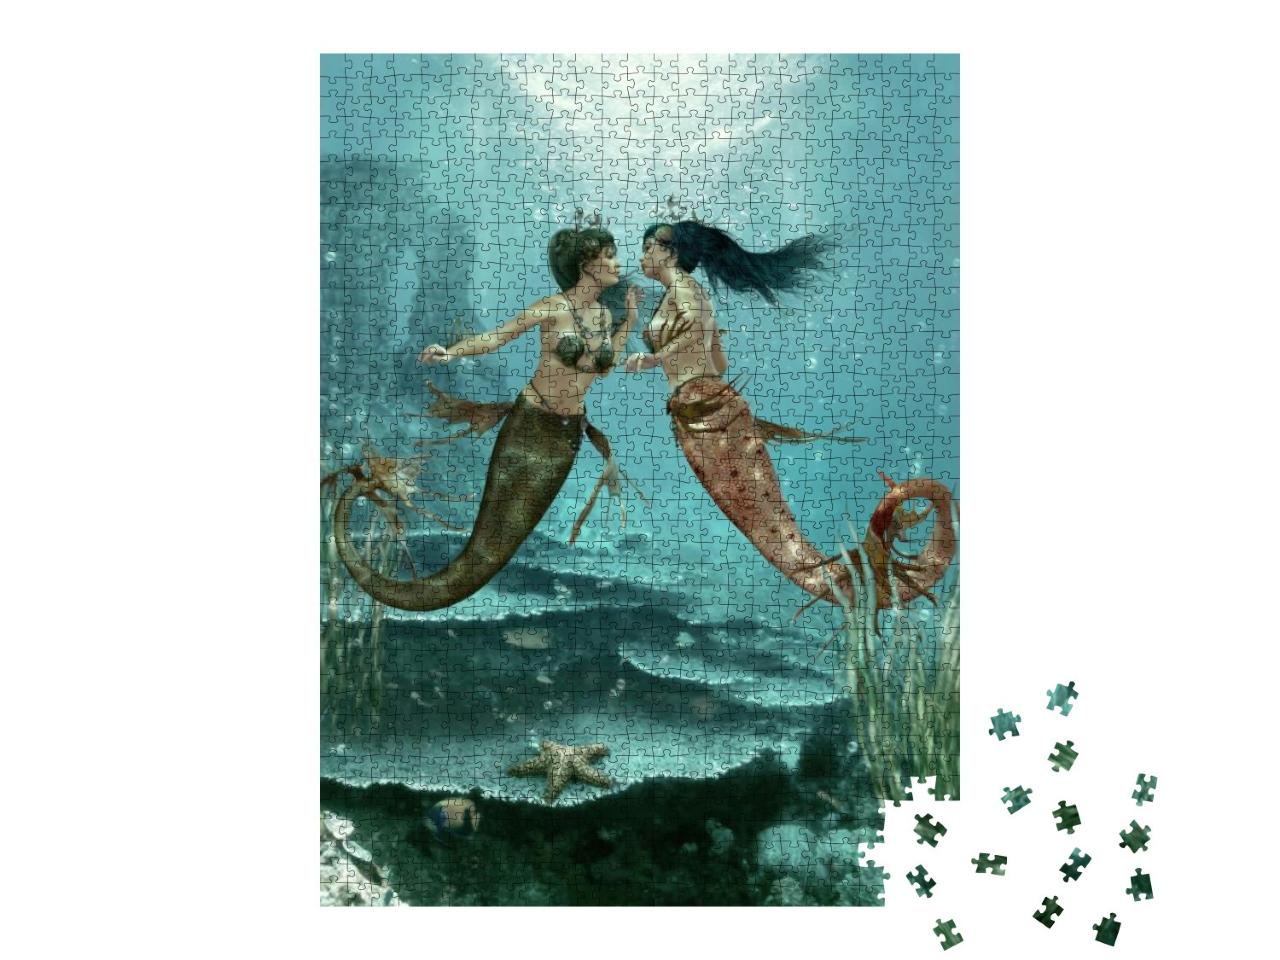 3D Computer Graphics of Two Little Mermaids... Jigsaw Puzzle with 1000 pieces